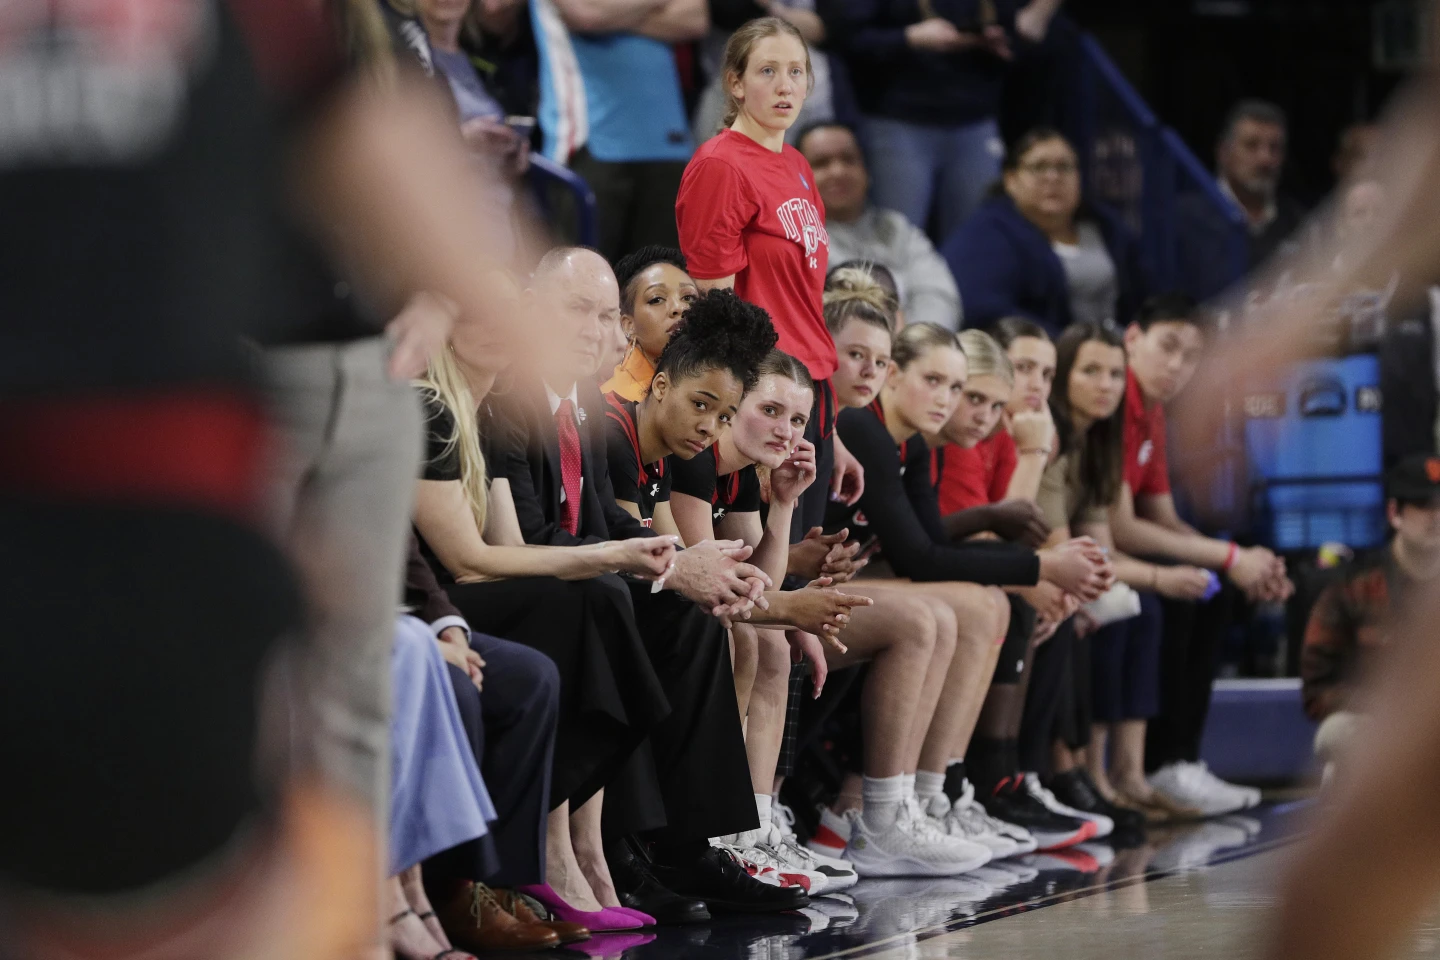 Utah coach says team was shaken after experiencing racist hate in Idaho, during NCAA Tournament